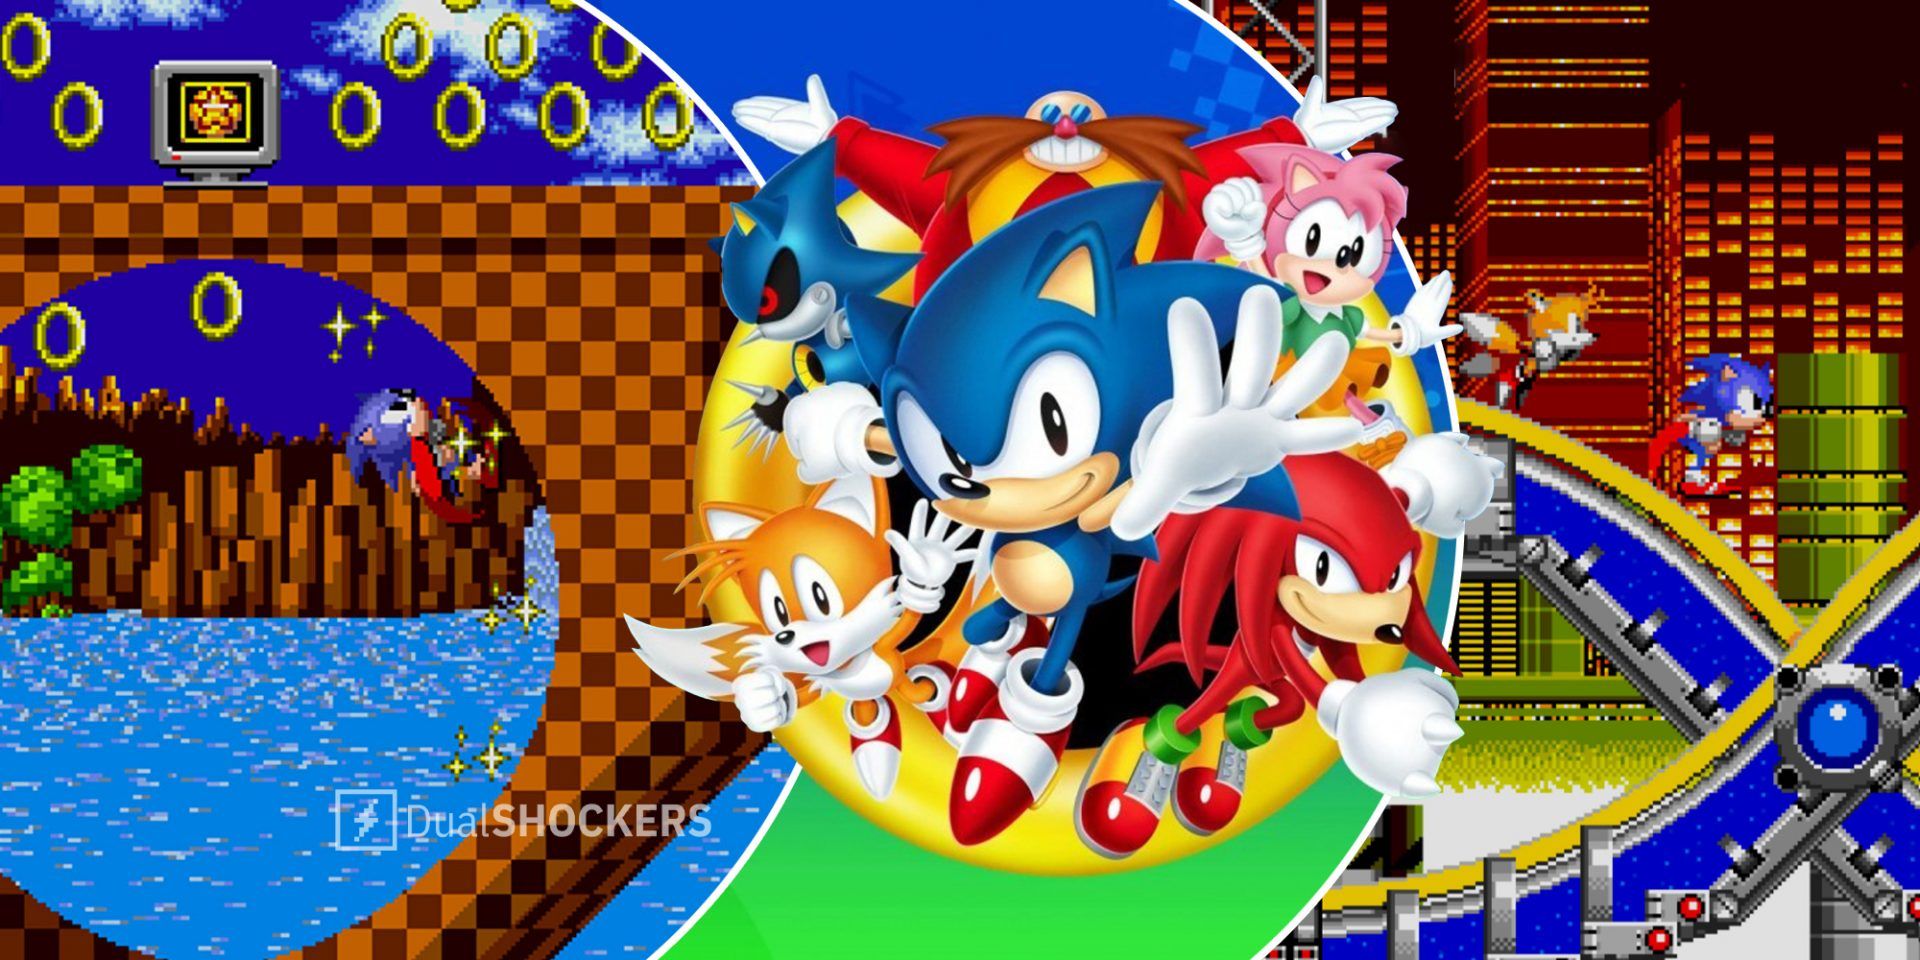 Sonic Origins: New Sonic 3 & Knuckles Cheat Codes 